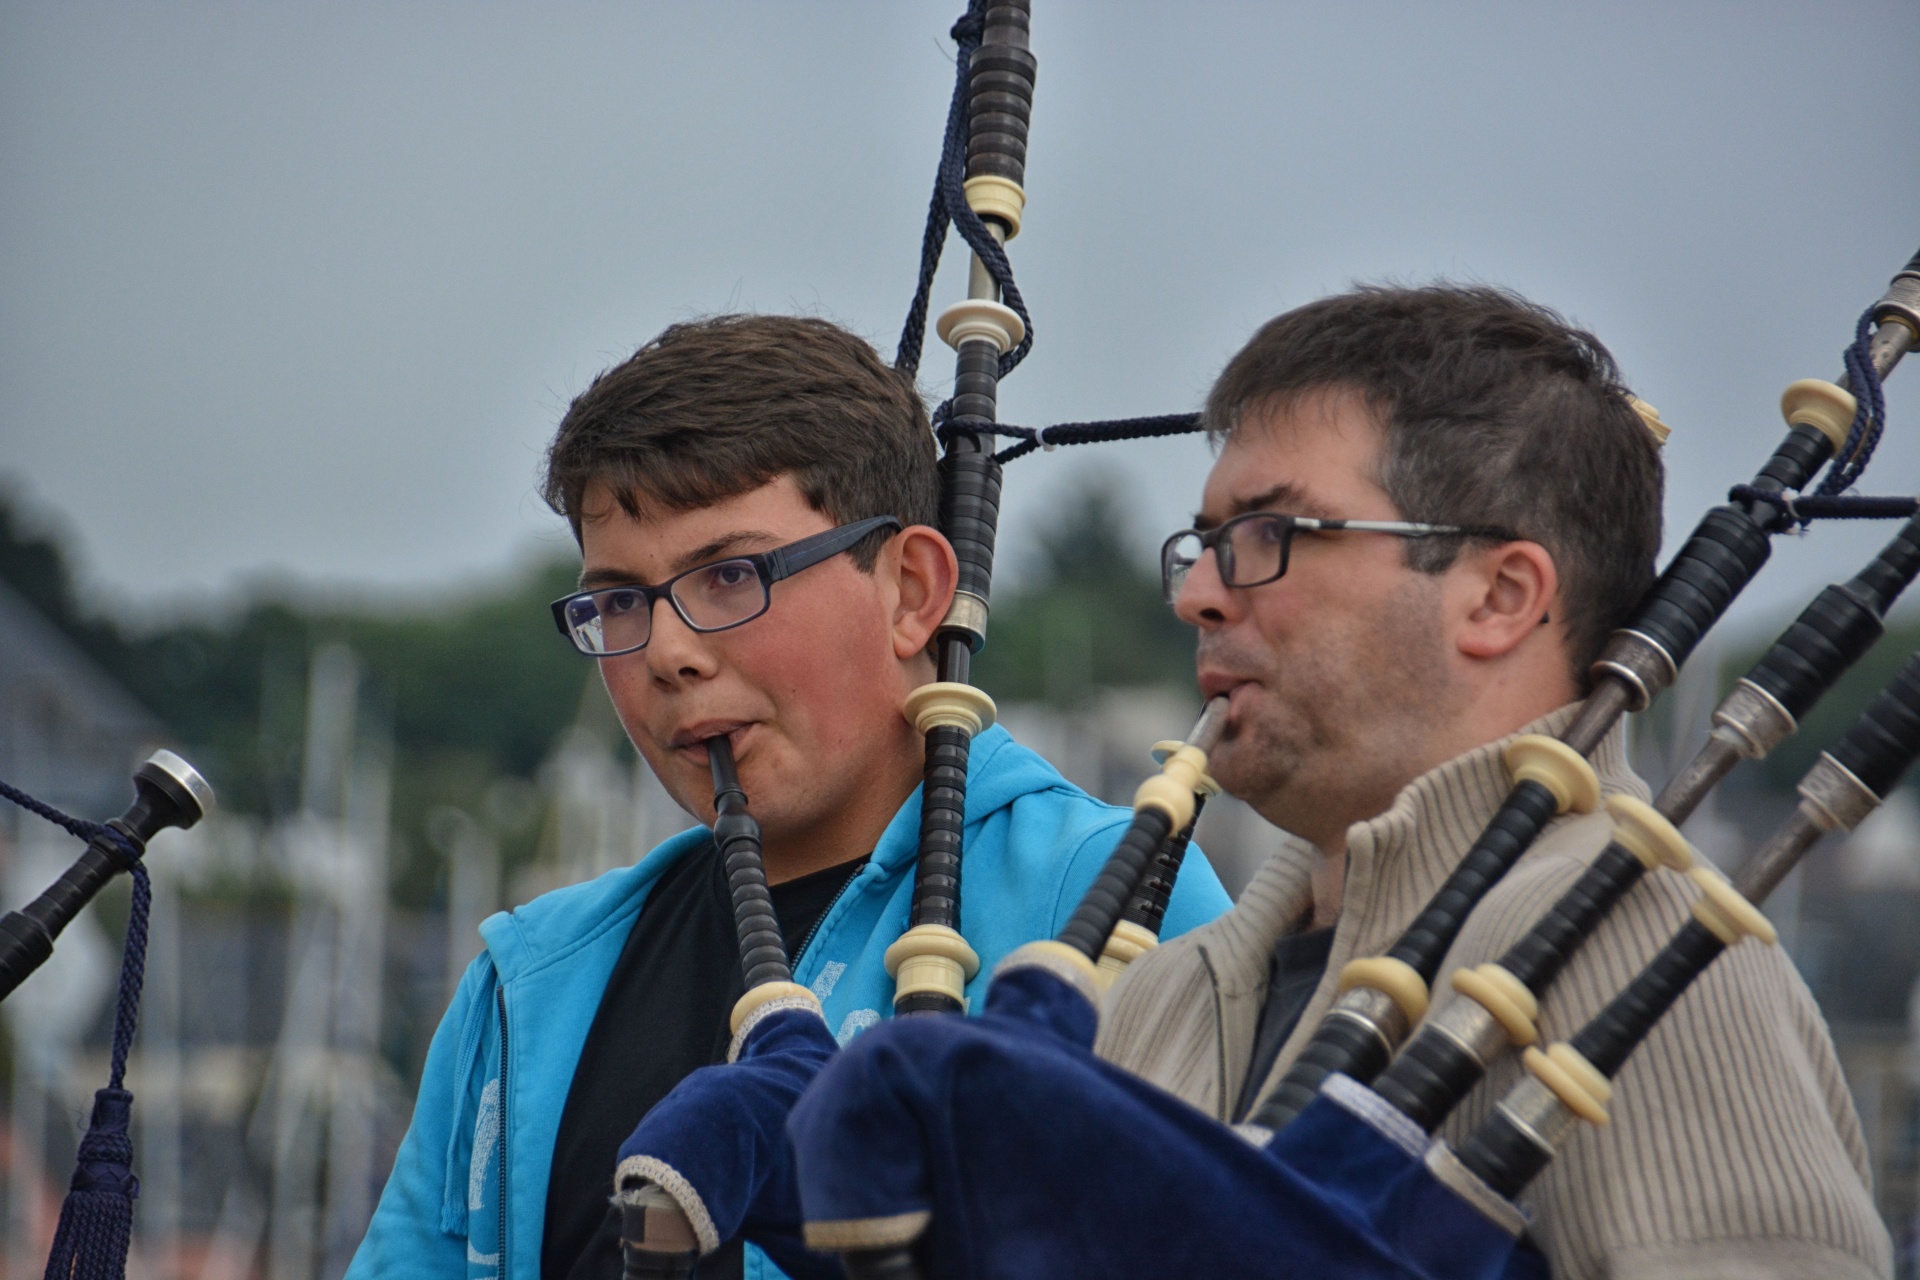 bagpipe music musicians free photo